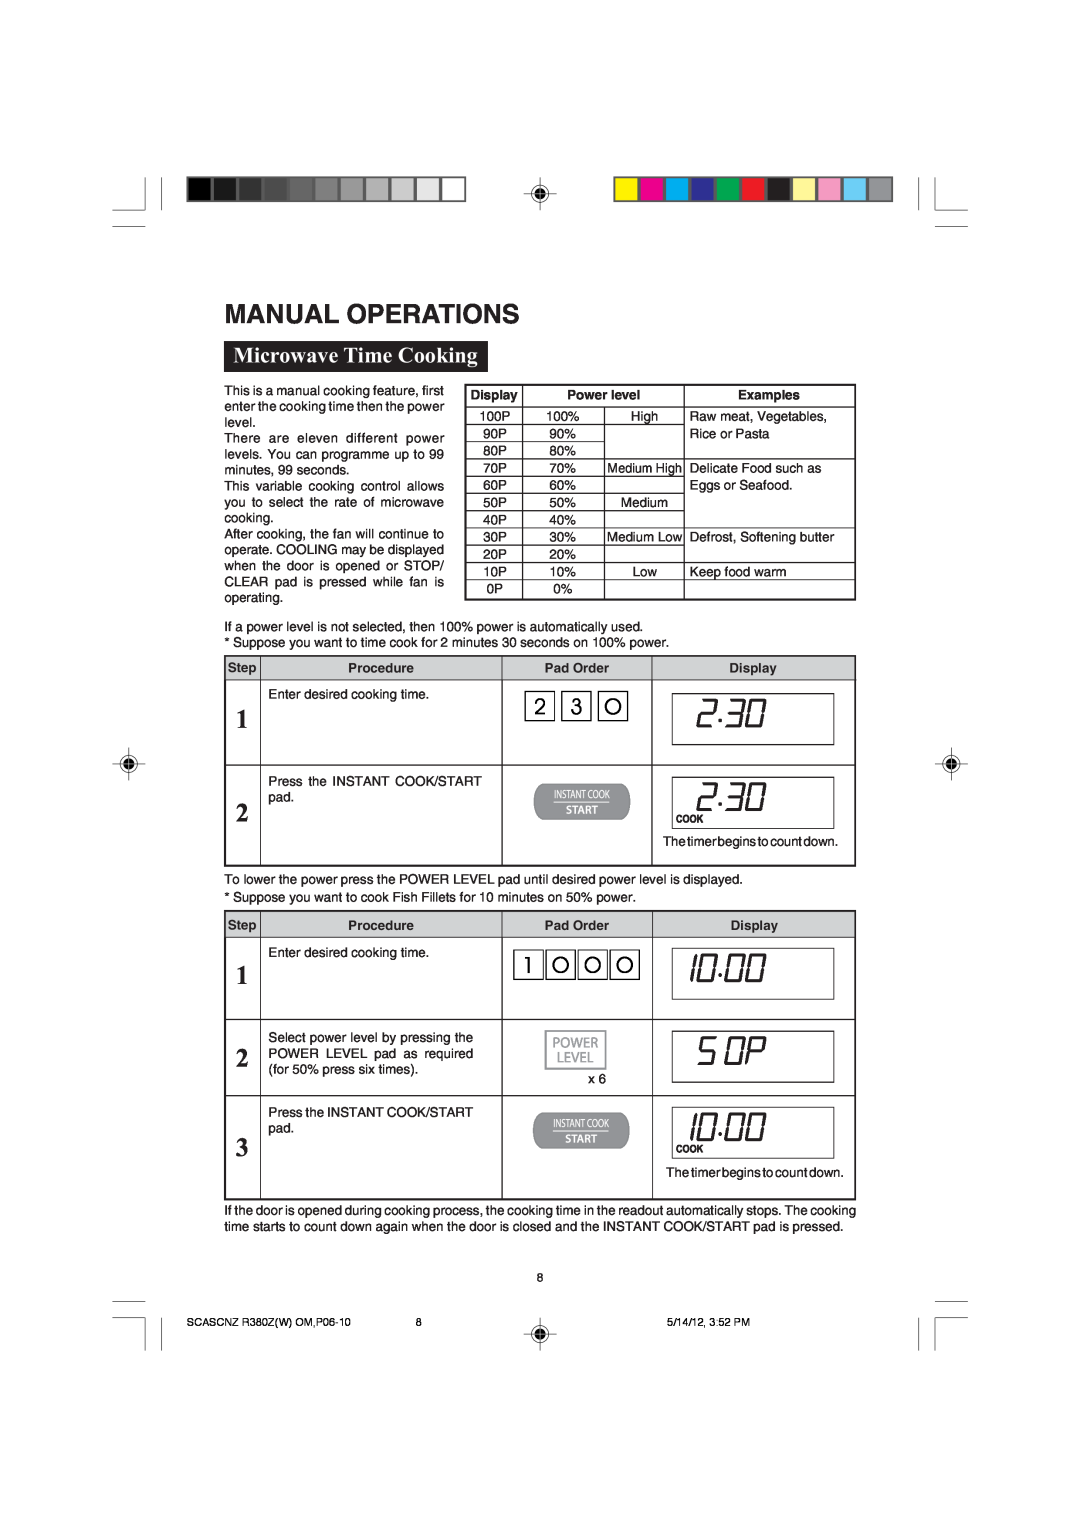 Sharp R-380Z(W) operation manual Manual Operations, Microwave Time Cooking 